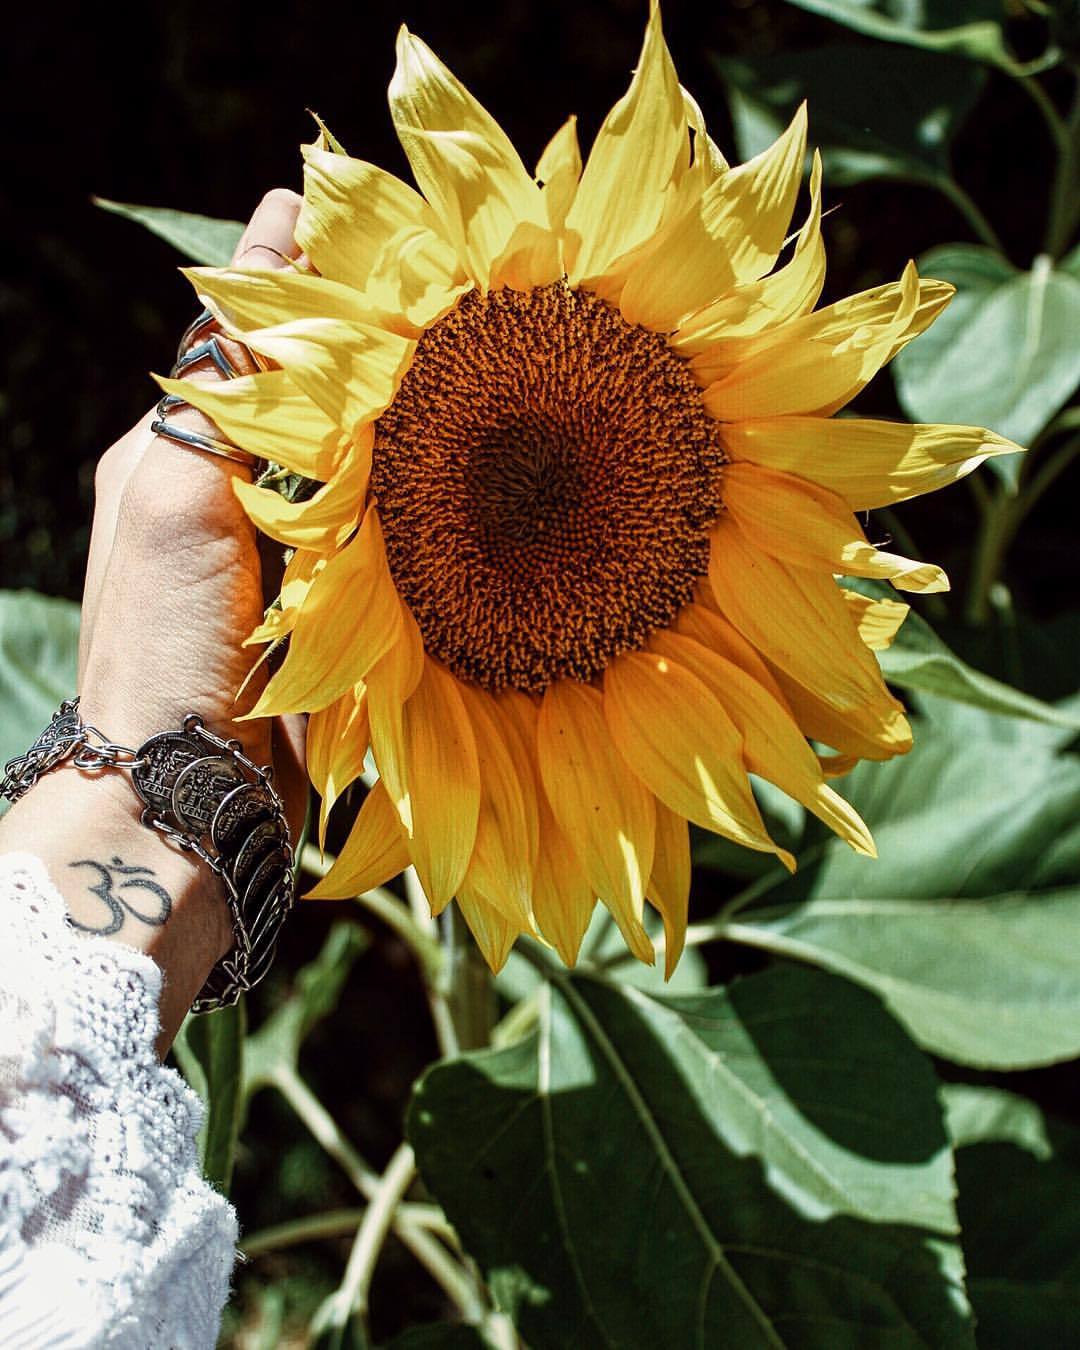 shana-makins:  Sunflowers remind me of a warm and golden childhood spent playing